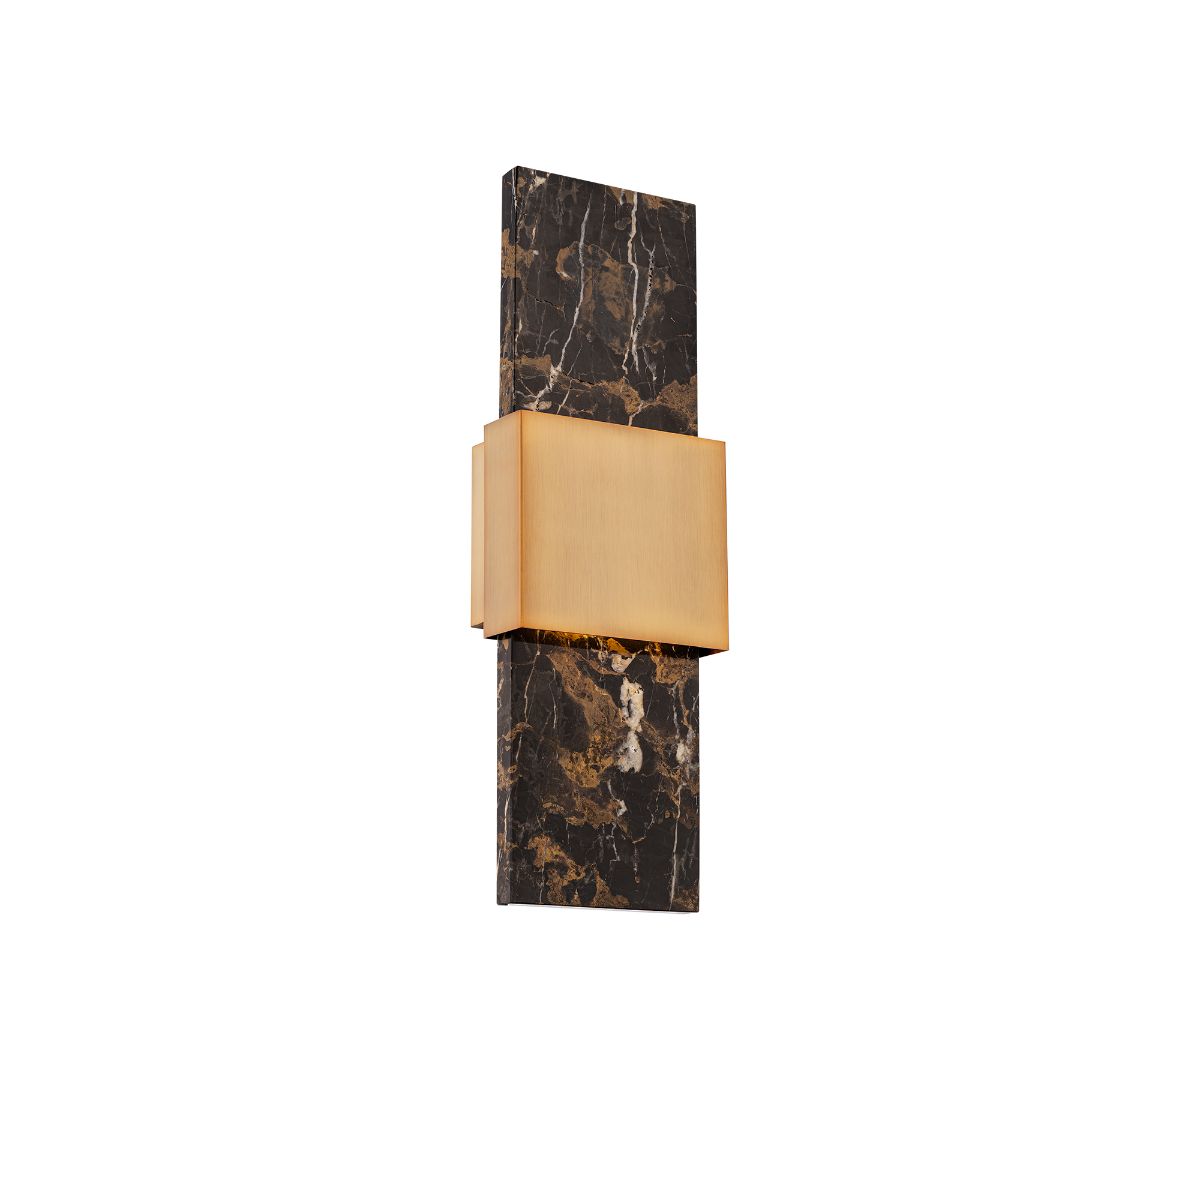 Mercer 24 in. LED Wall Sconce Brass finish